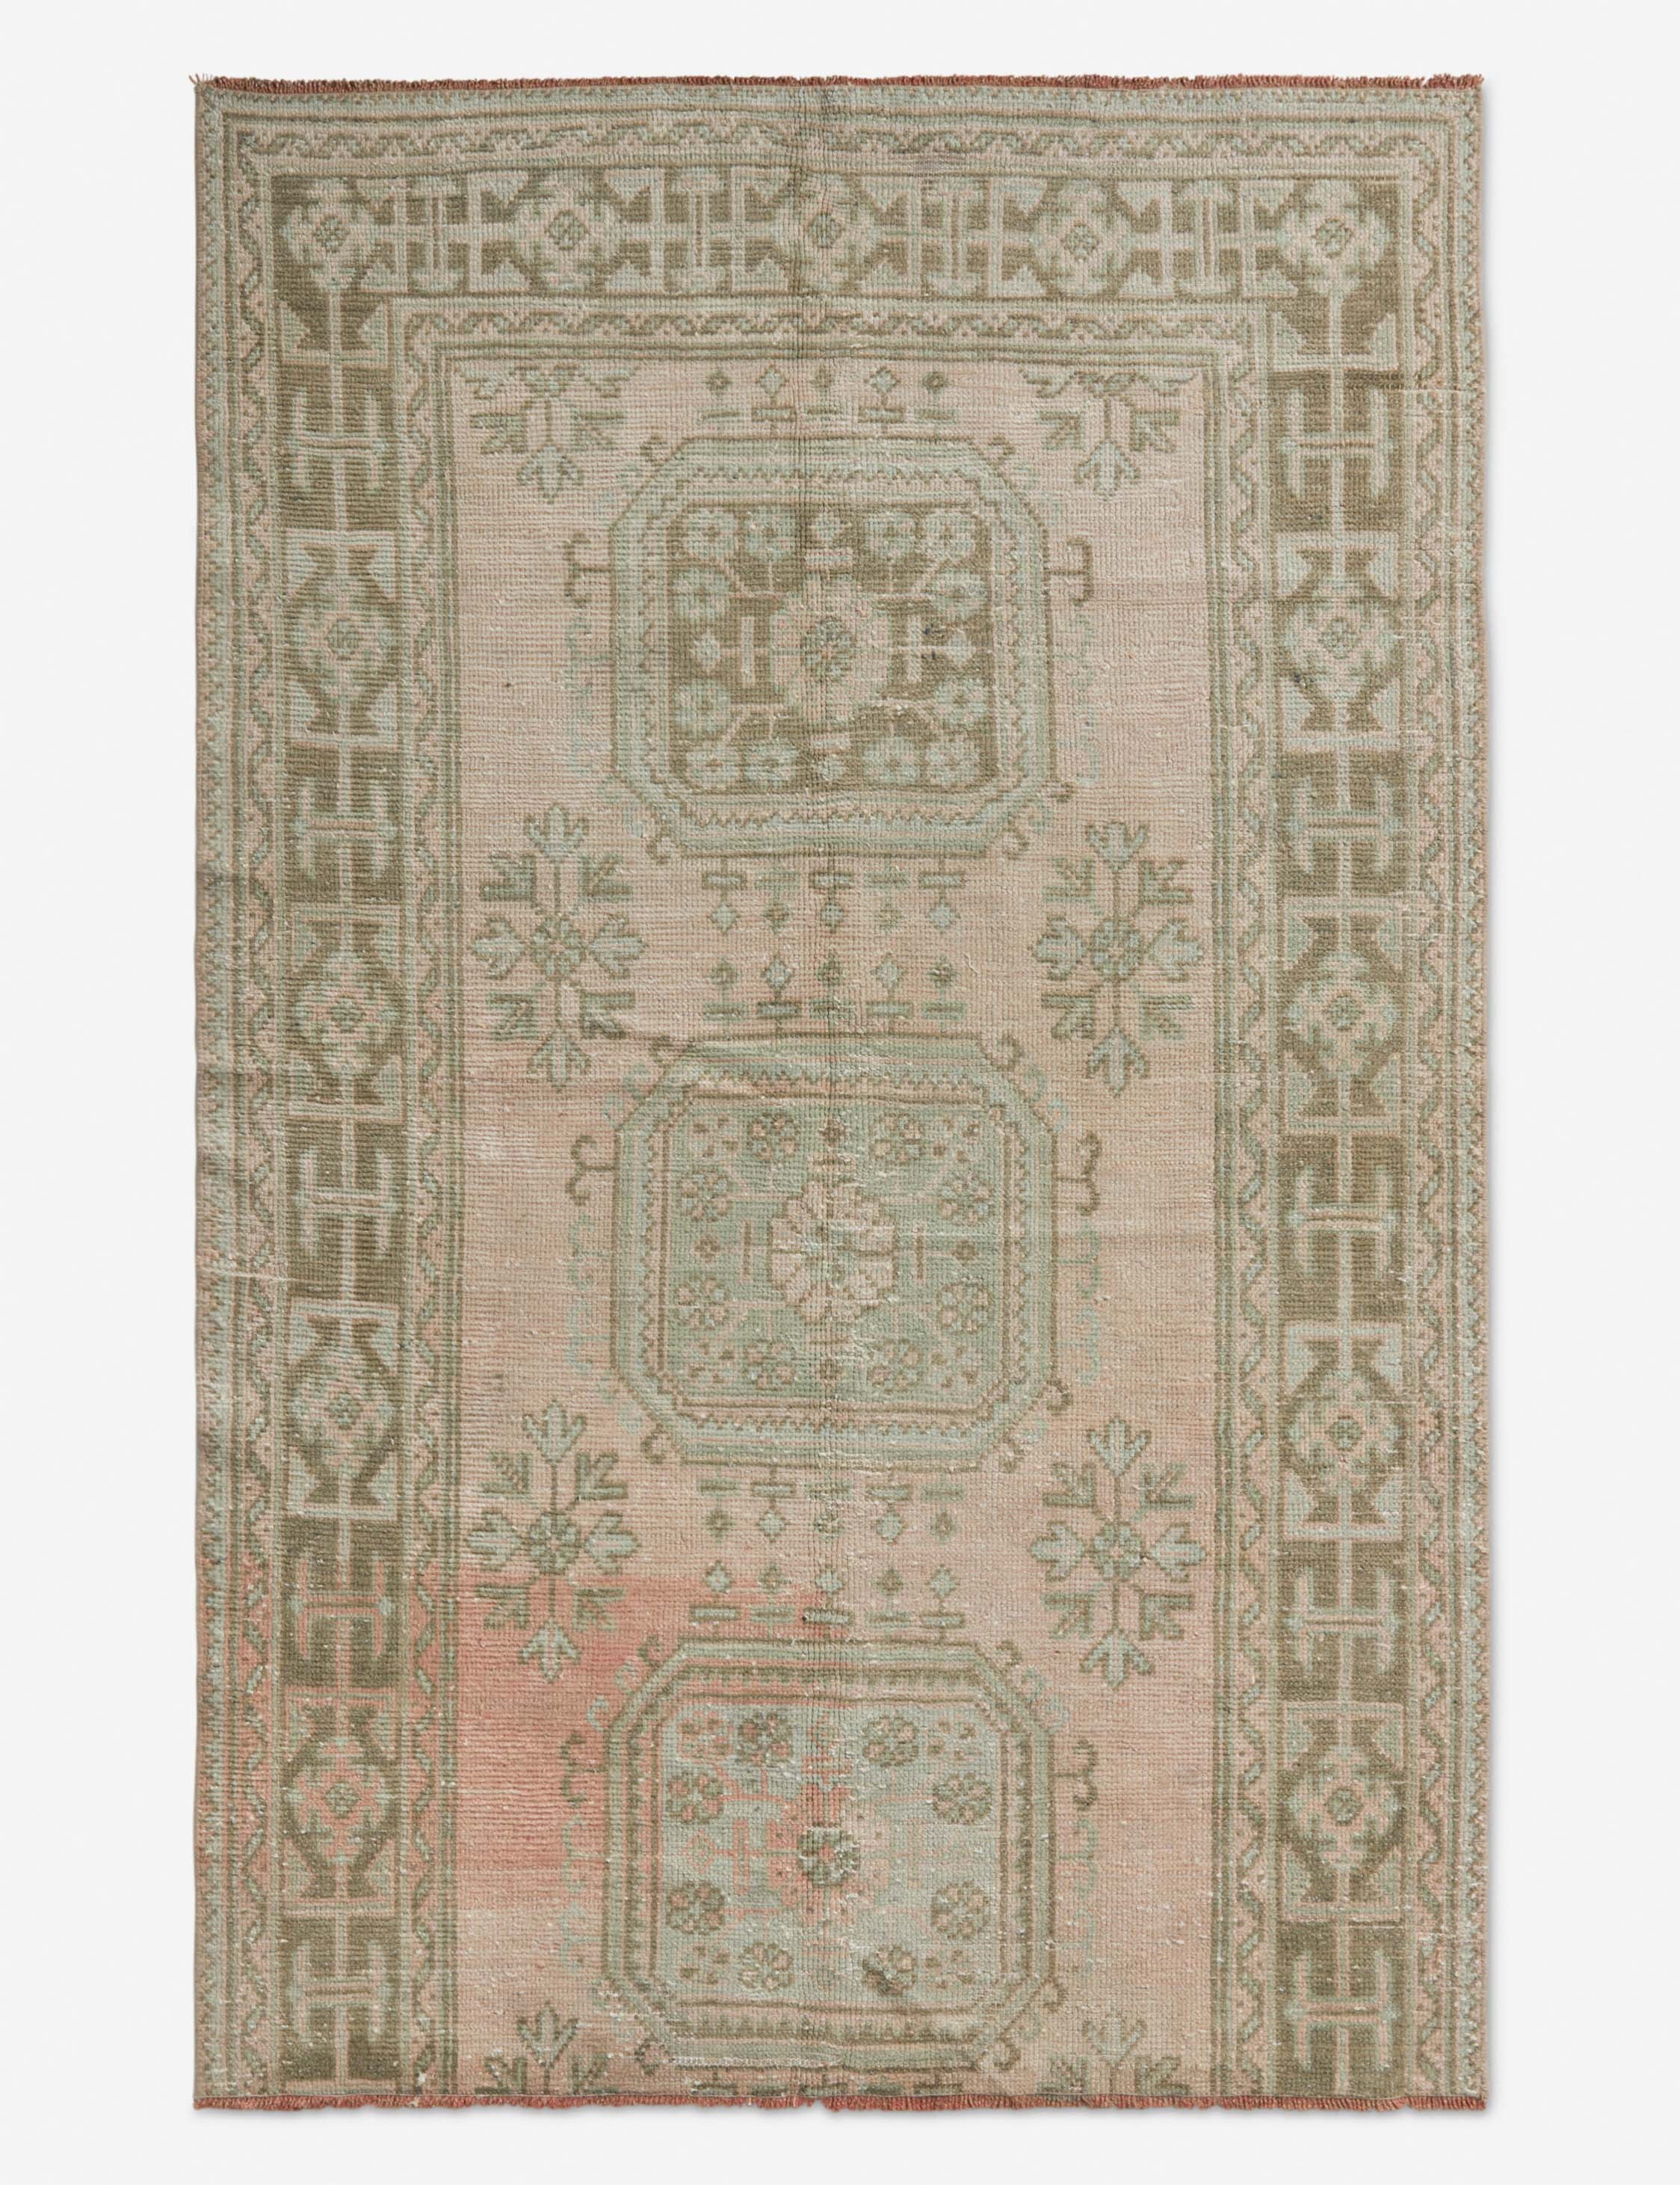 Vintage Turkish Hand-Knotted Wool Rug No. 192, 4'3